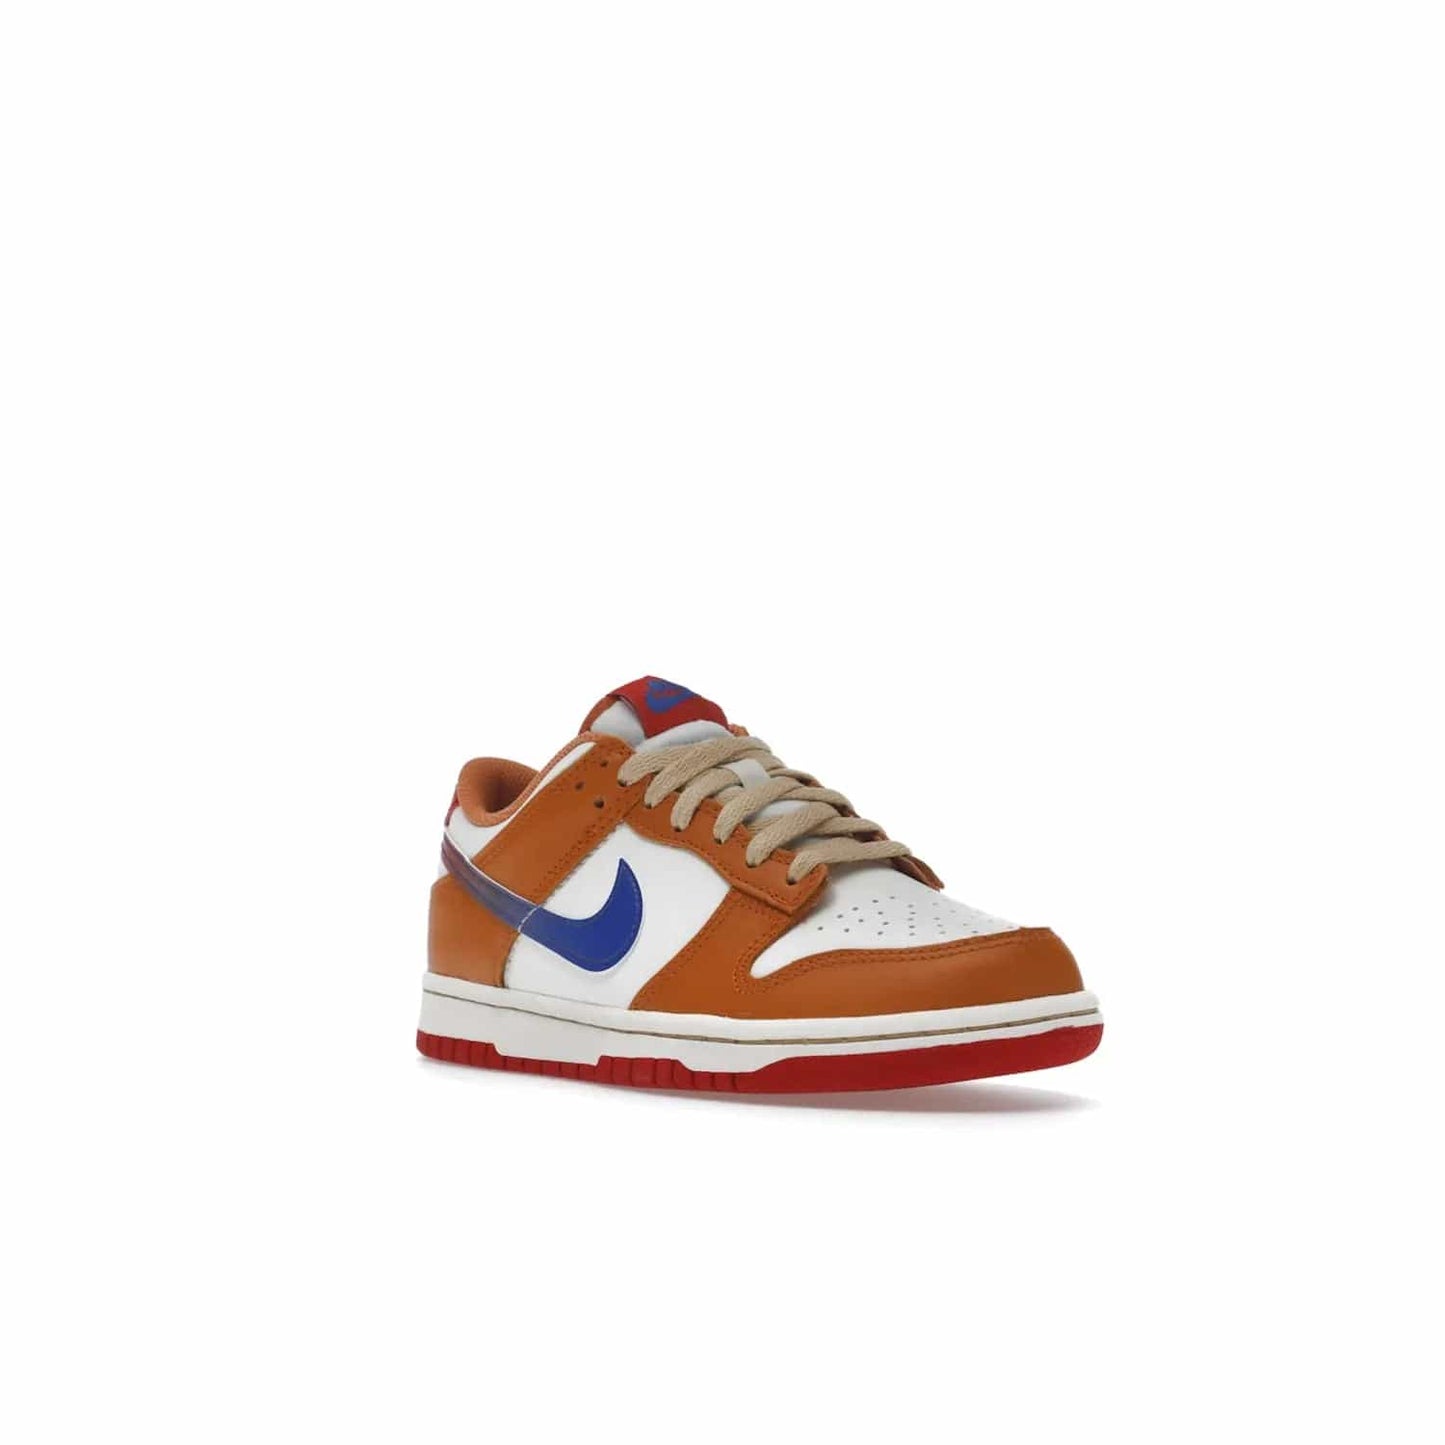 Nike Dunk Low Hot Curry Game Royal (GS) - Image 6 - Only at www.BallersClubKickz.com - Shop the Nike Dunk Low Hot Curry Game Royal GS and rock a classic color scheme to represent the New York Knicks. Featuring a smooth leather upper, retro Nike branding and a low cut collar and rubber cup sole for comfort and protection. Get yours on September 7 at $85.